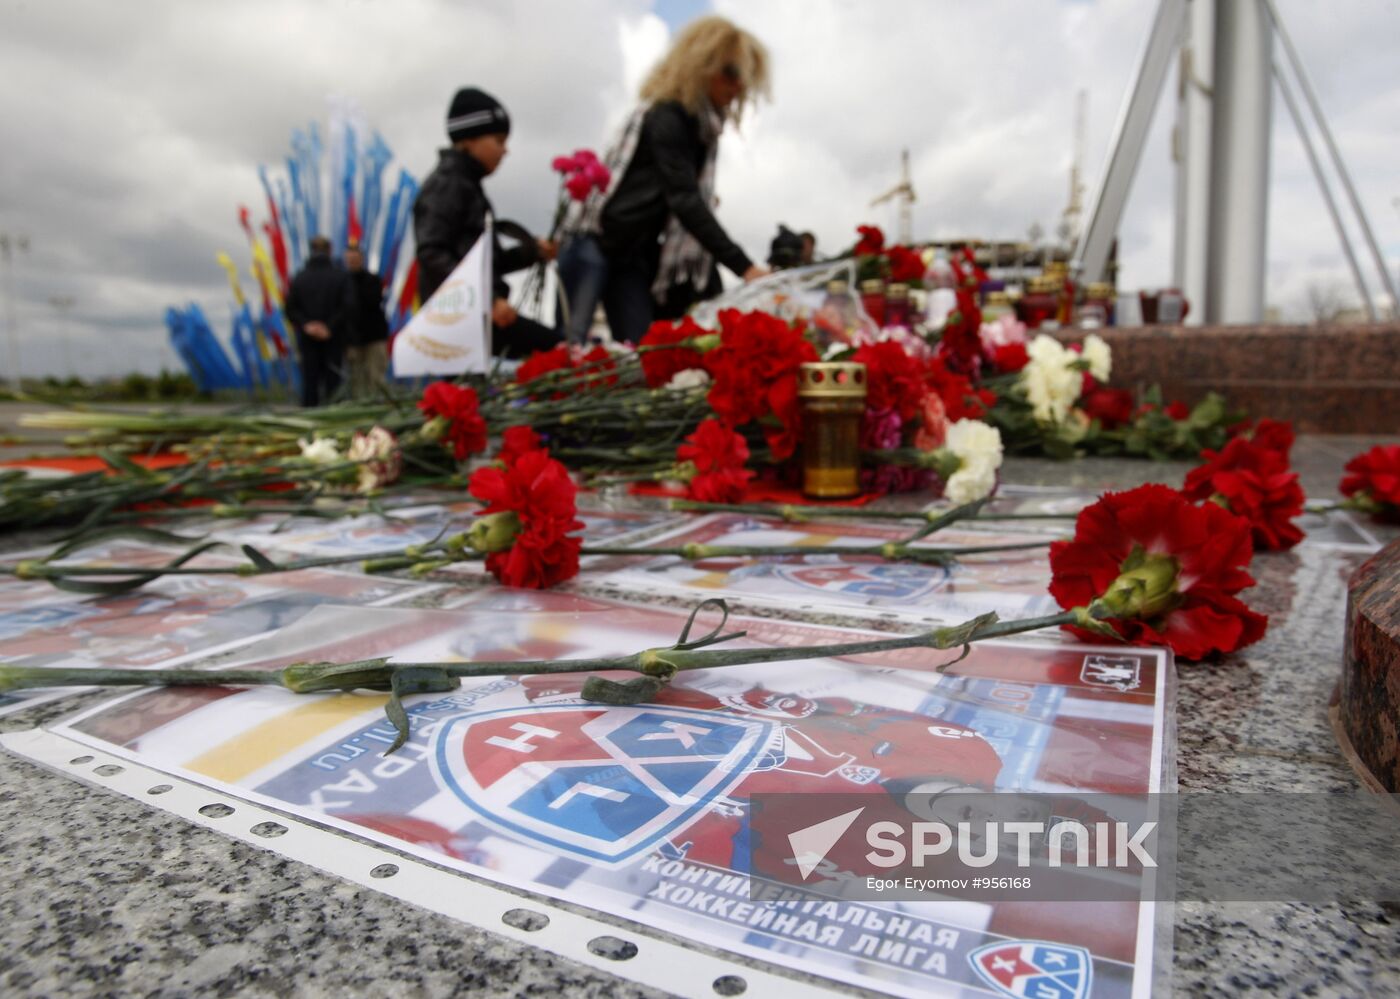 Flowers and candles to mourn Lokomotiv hockey players